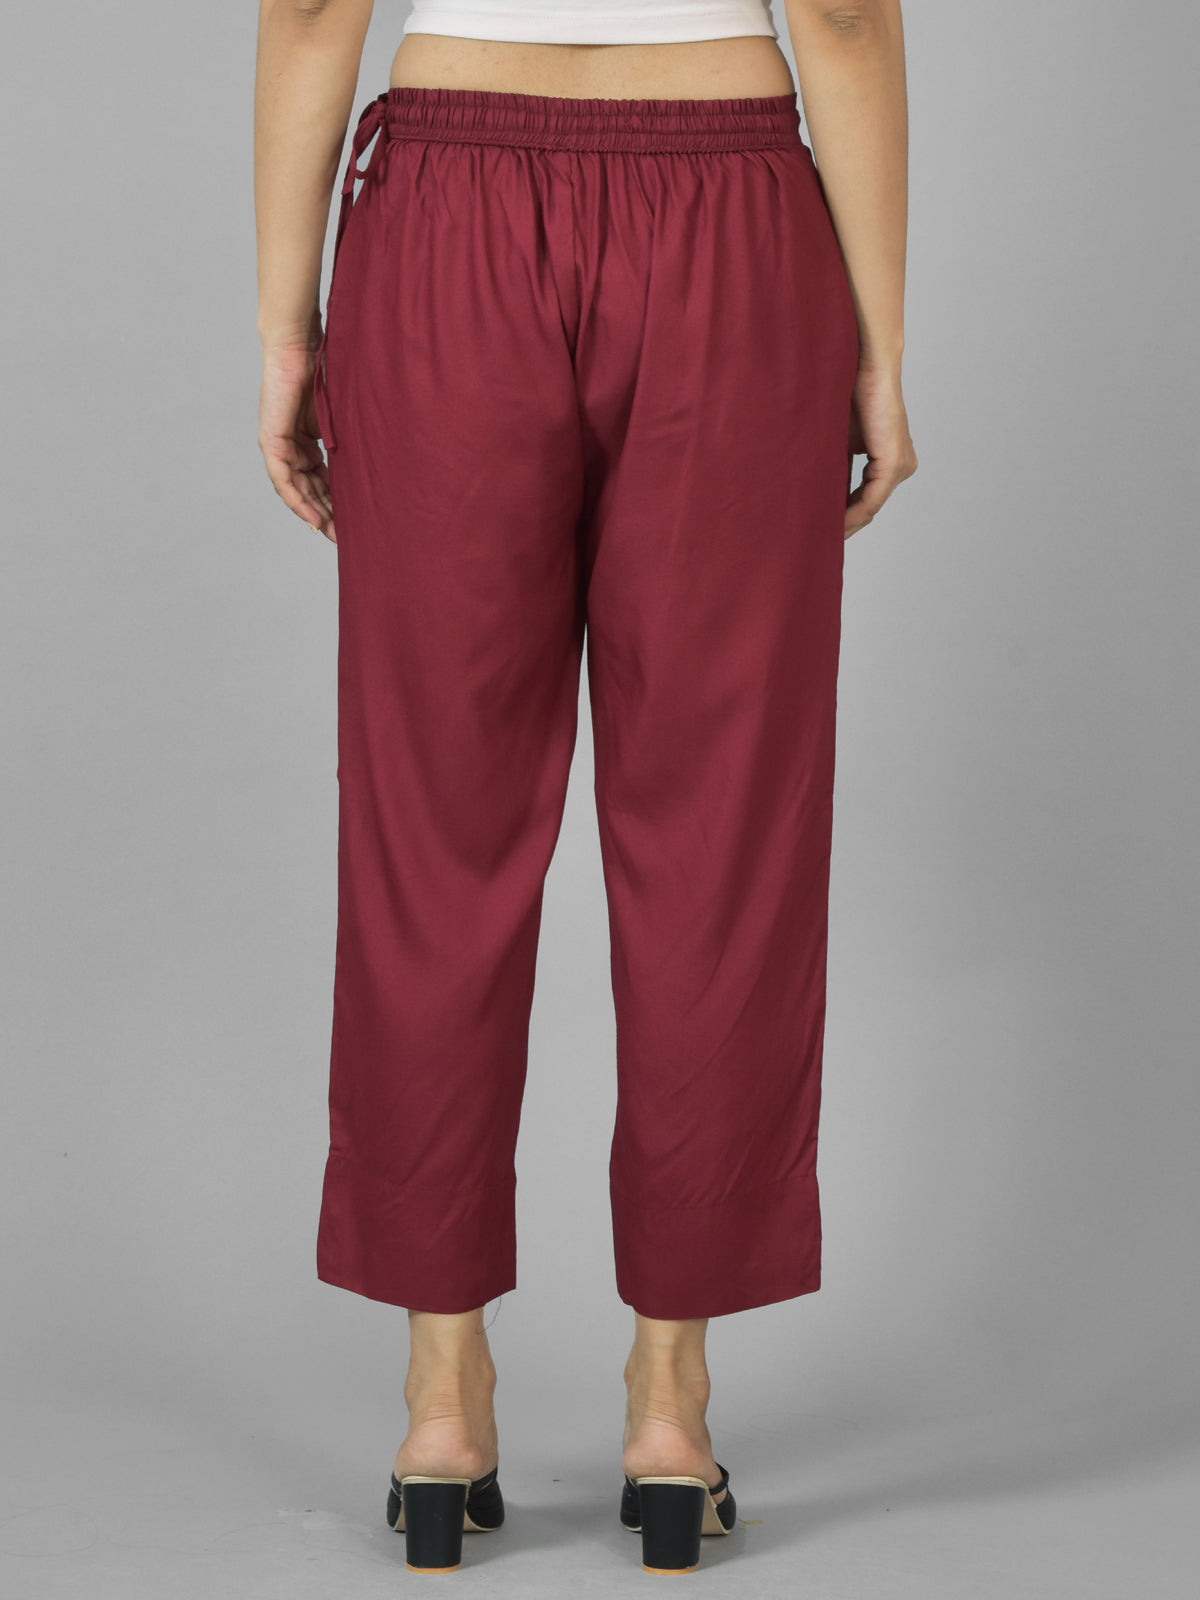 Pack Of 2 Womens Mauve Pink And Wine Ankle Length Rayon Culottes Trouser Combo